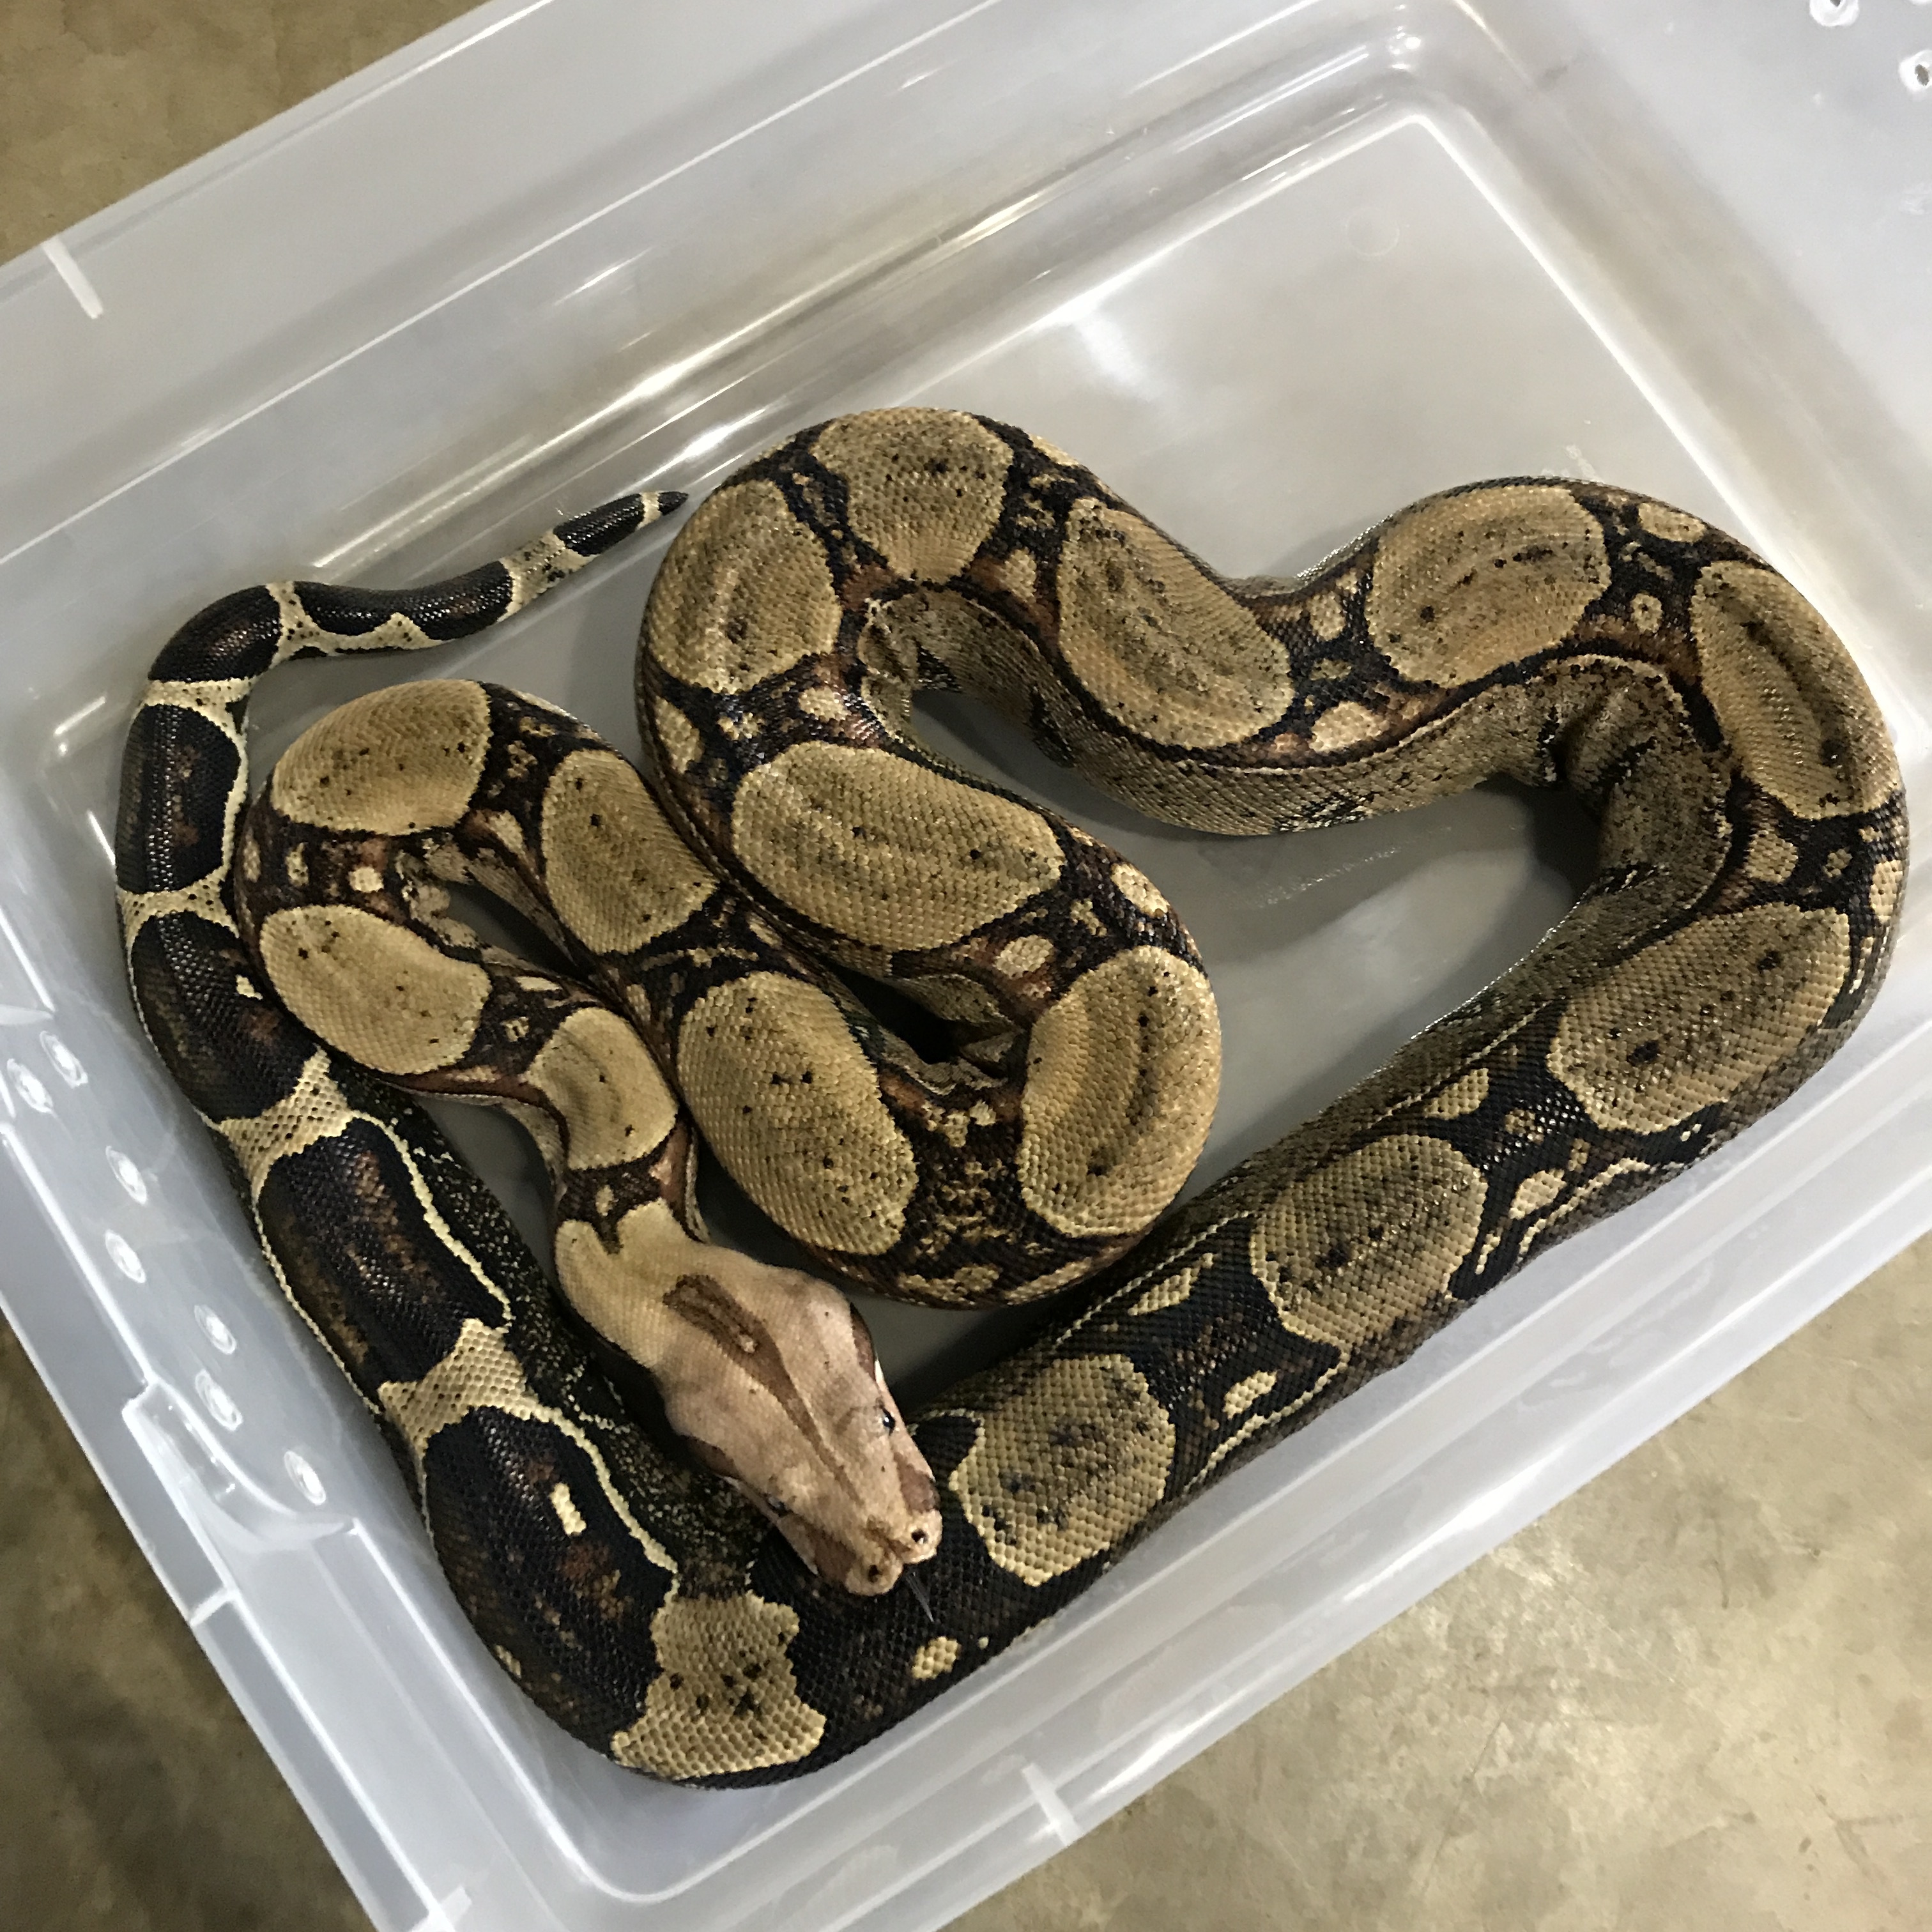 Squaretail Boa Constrictor by Boas Abound